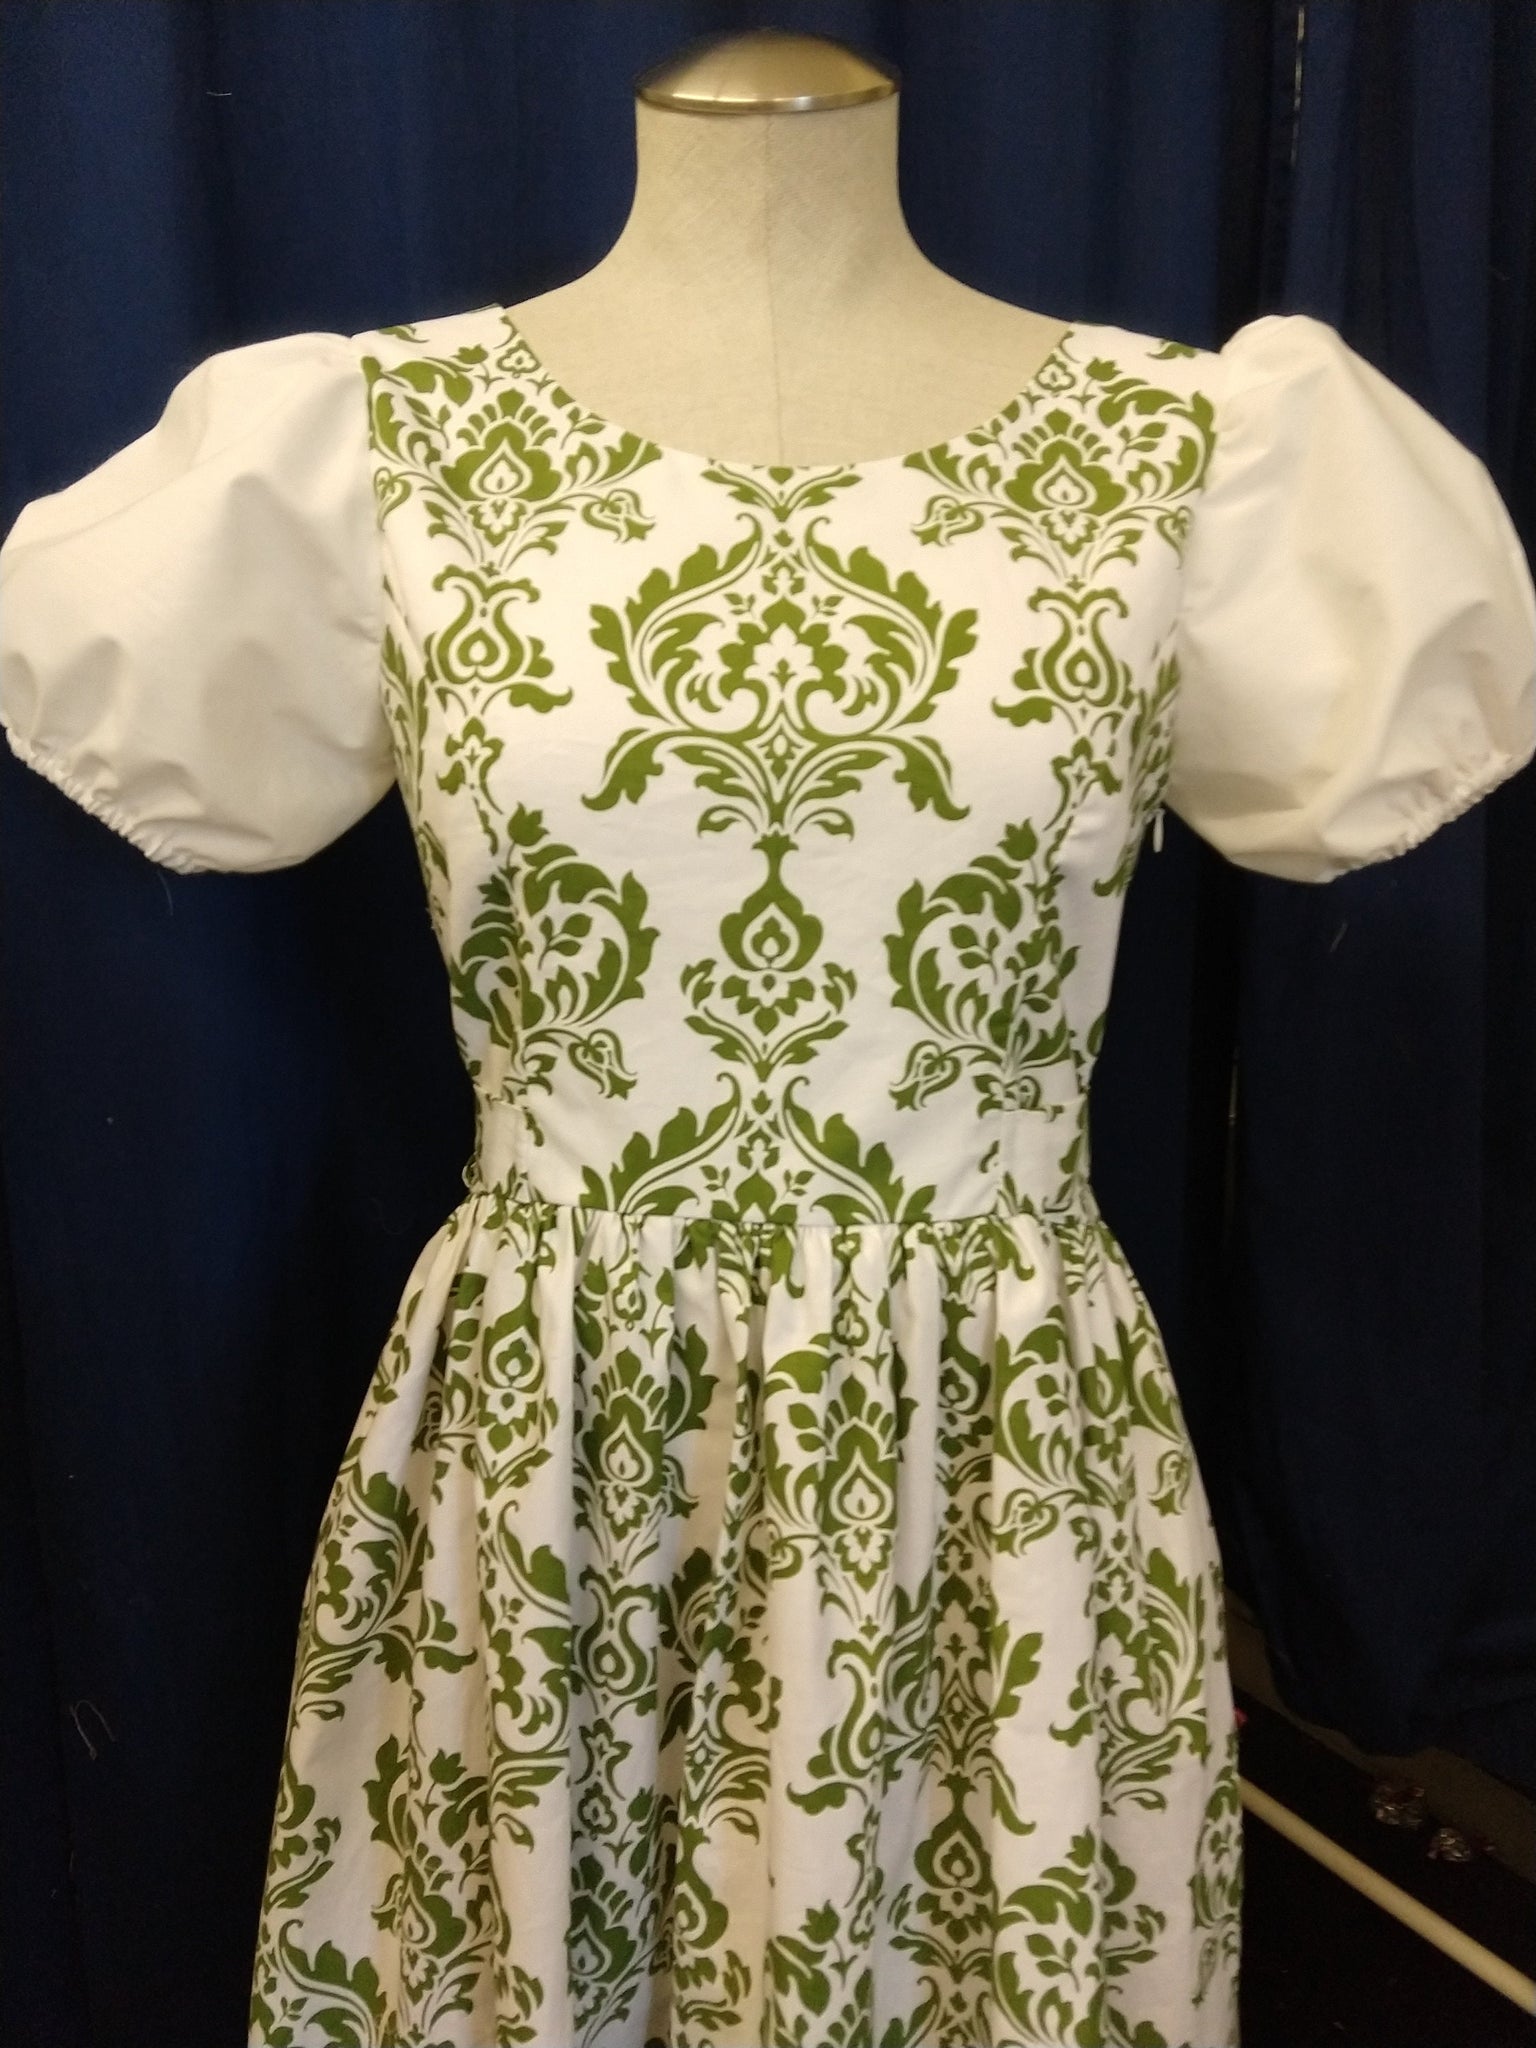 Liesl dress from the Sound of Music READY TO SHIP in certain sizes